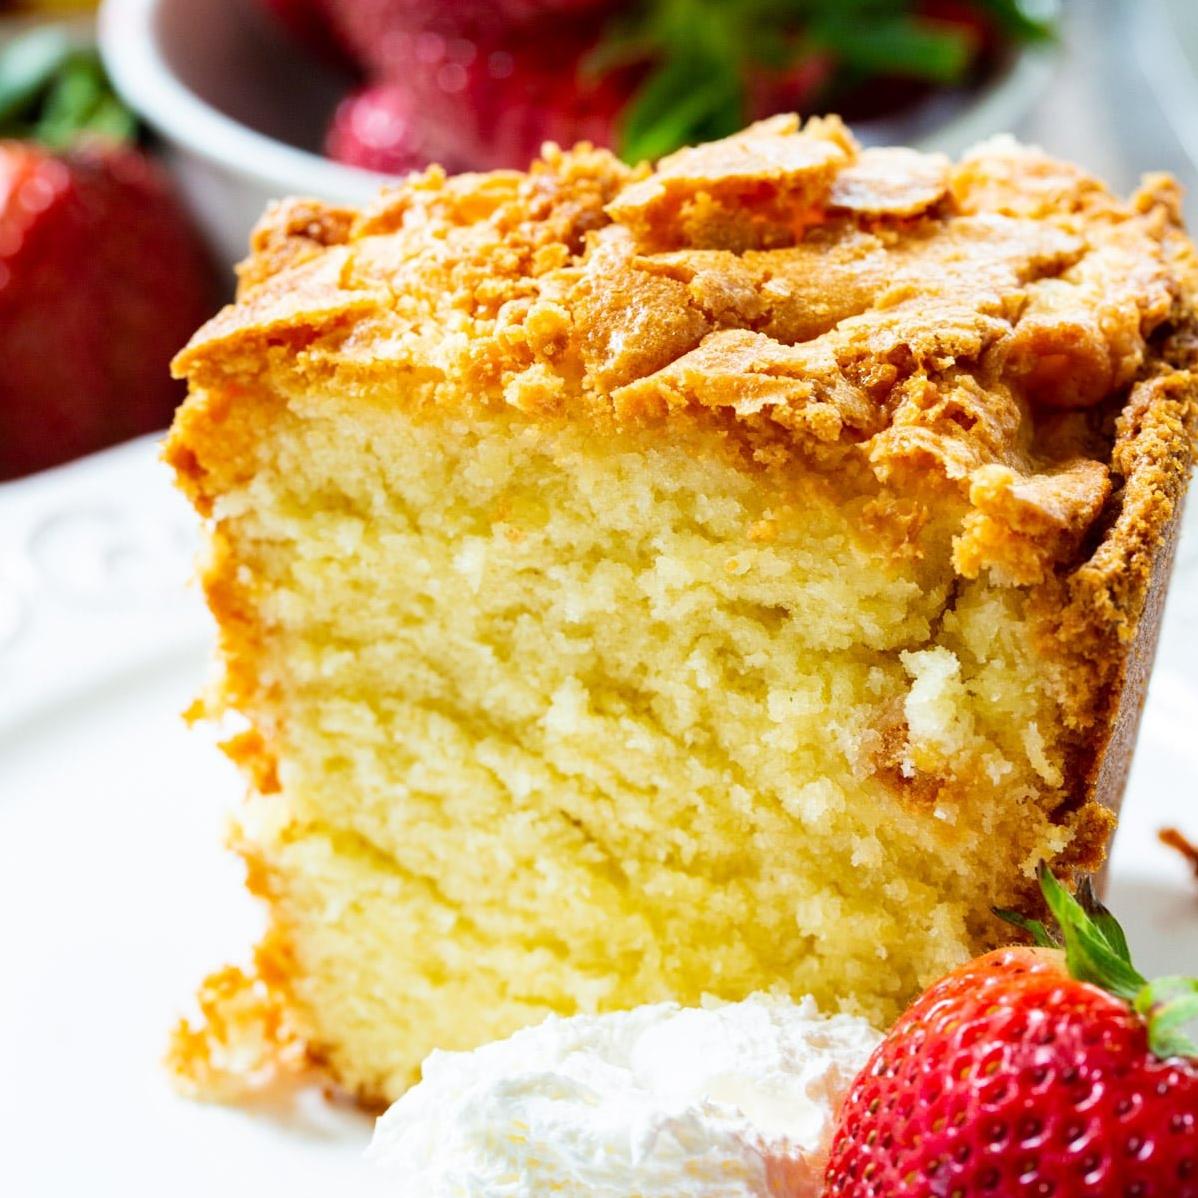  The golden crust of this pound cake will become your new obsession.